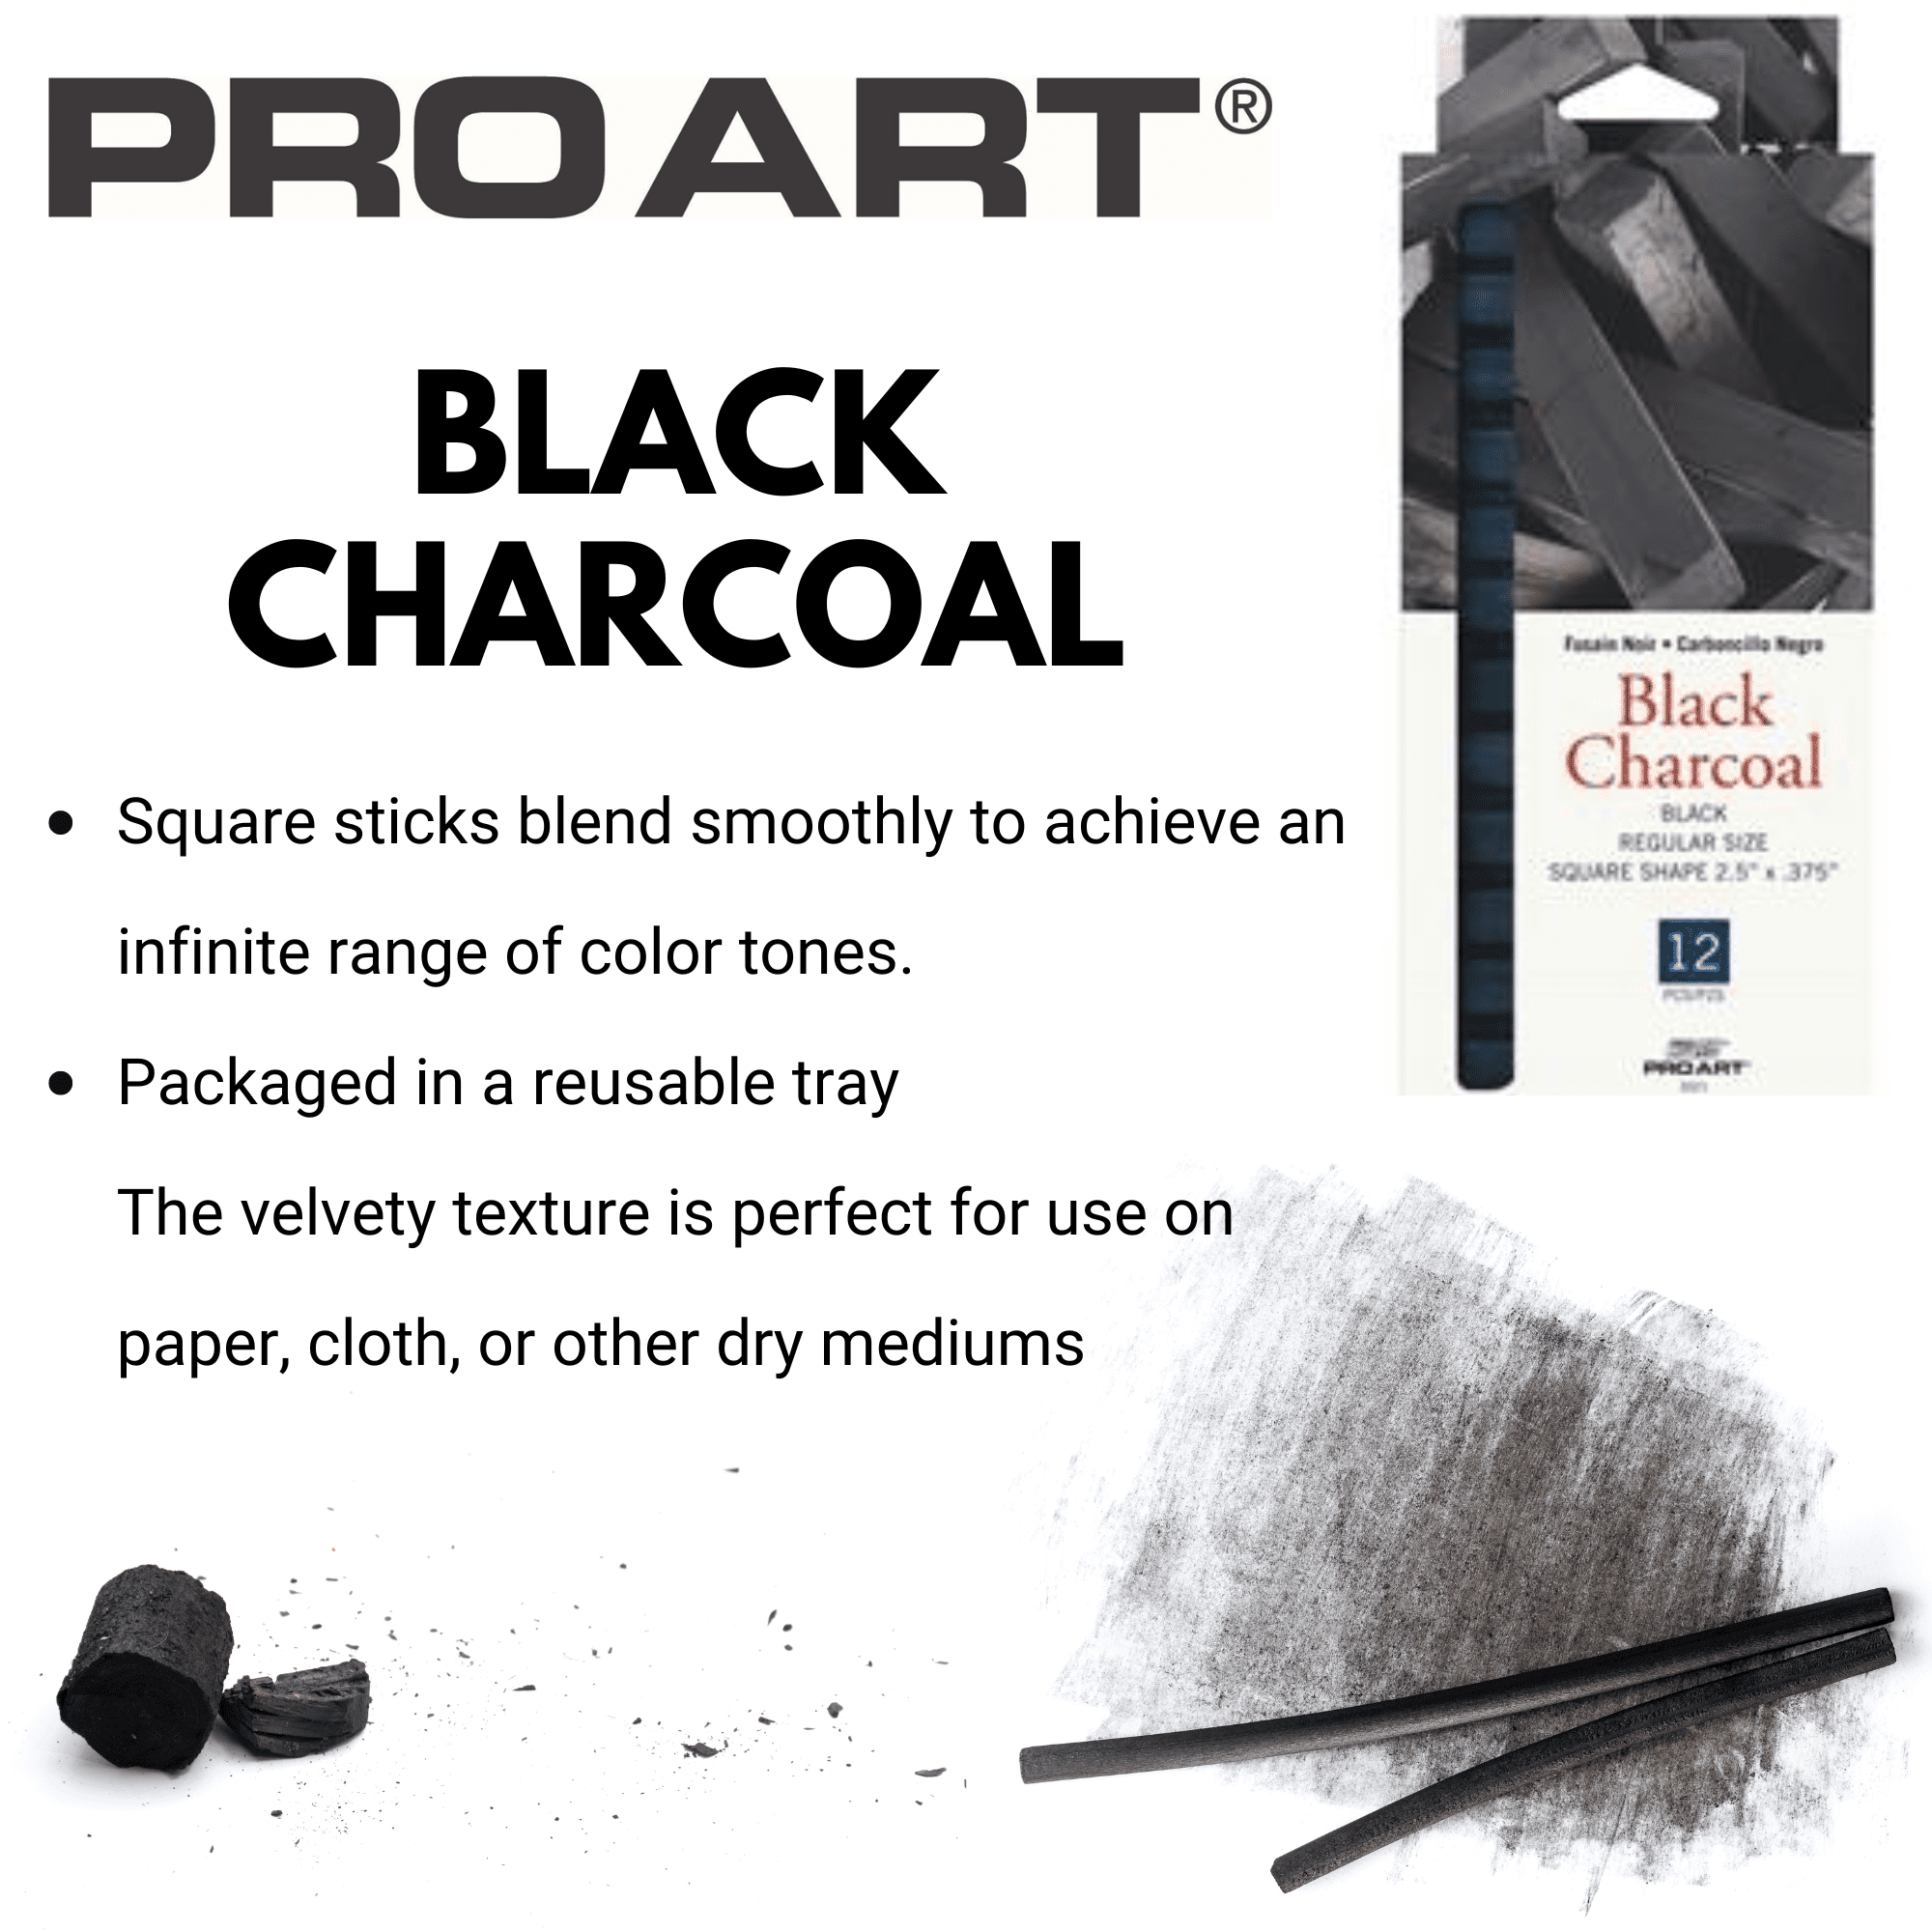 Pro Art Charcoal Compressed Charcoal Sticks, dark grey, for charcoal  drawing, sketching, shading, charcoal art supplies. 2 count charcoal sticks  for